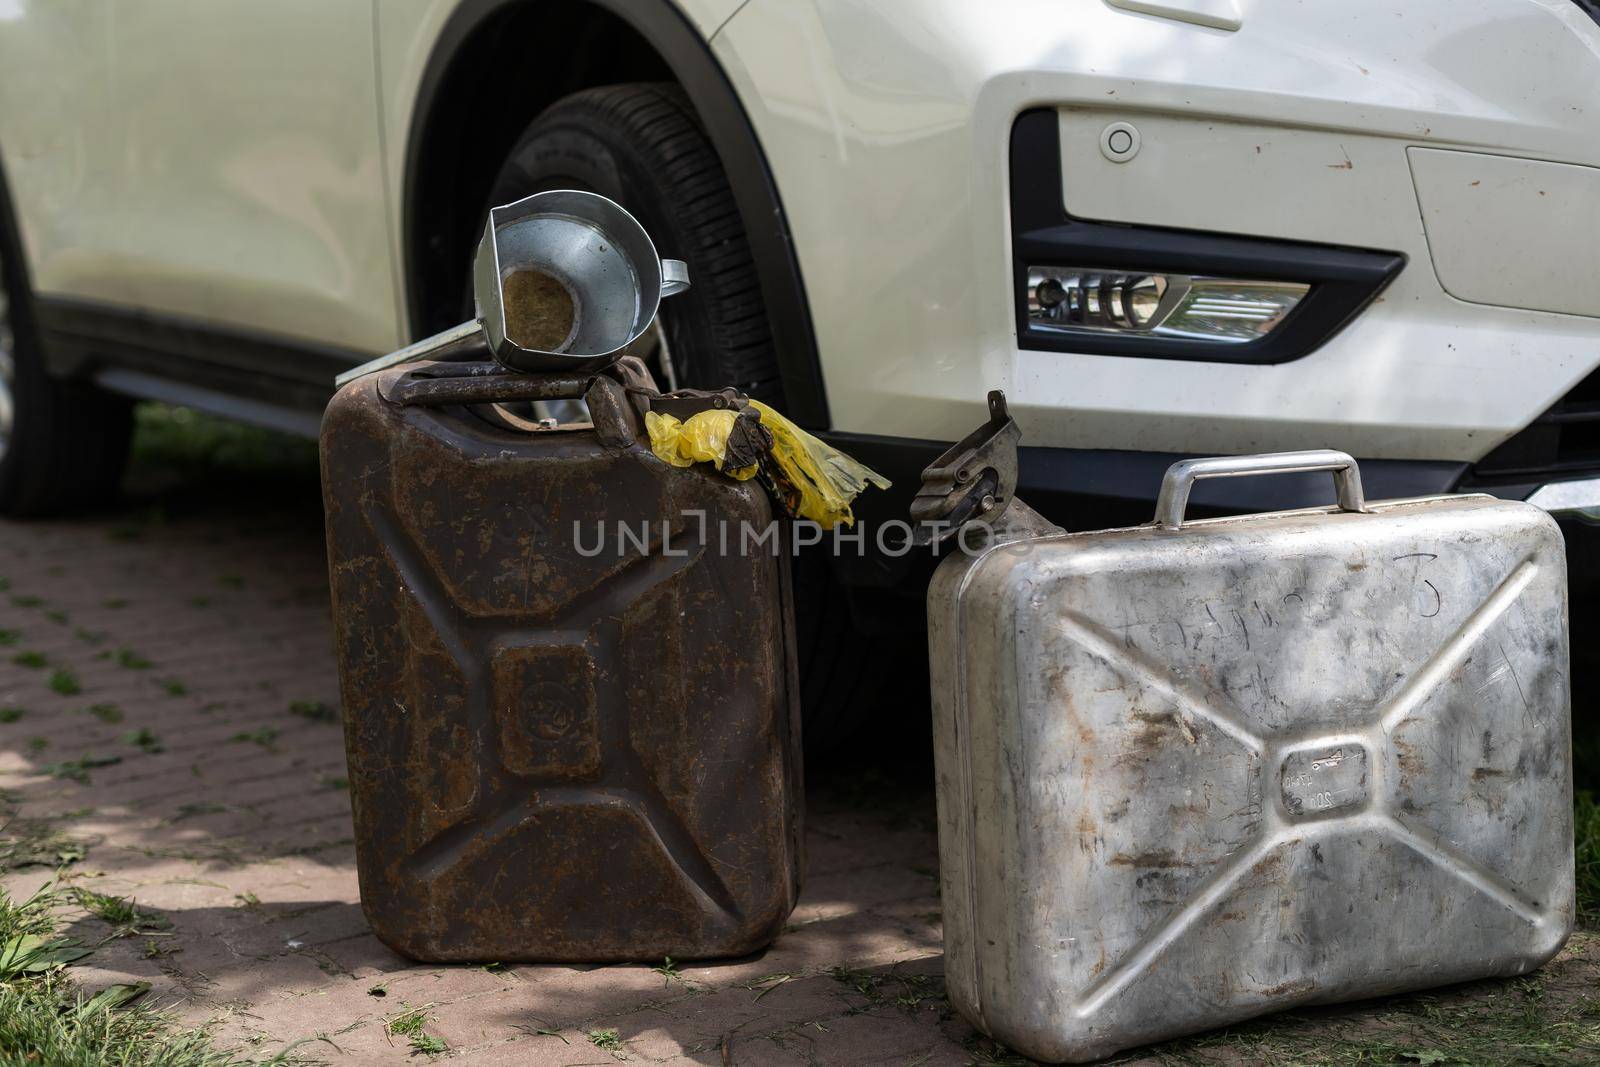 canister and watering can for diesel. the canister with the fuel and the filler funnel